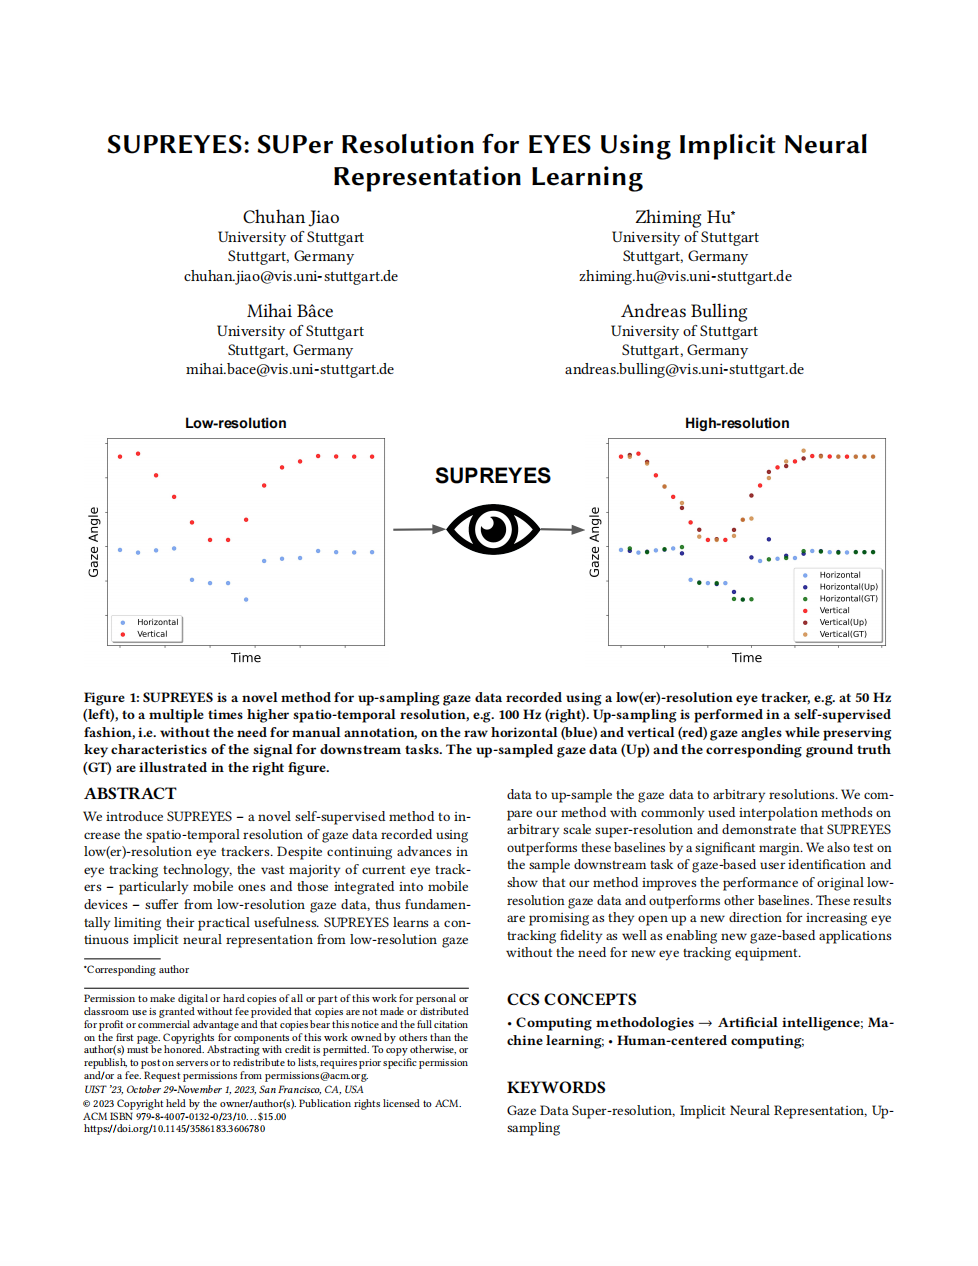 SUPREYES: SUPer Resolution for EYES Using Implicit Neural Representation Learning